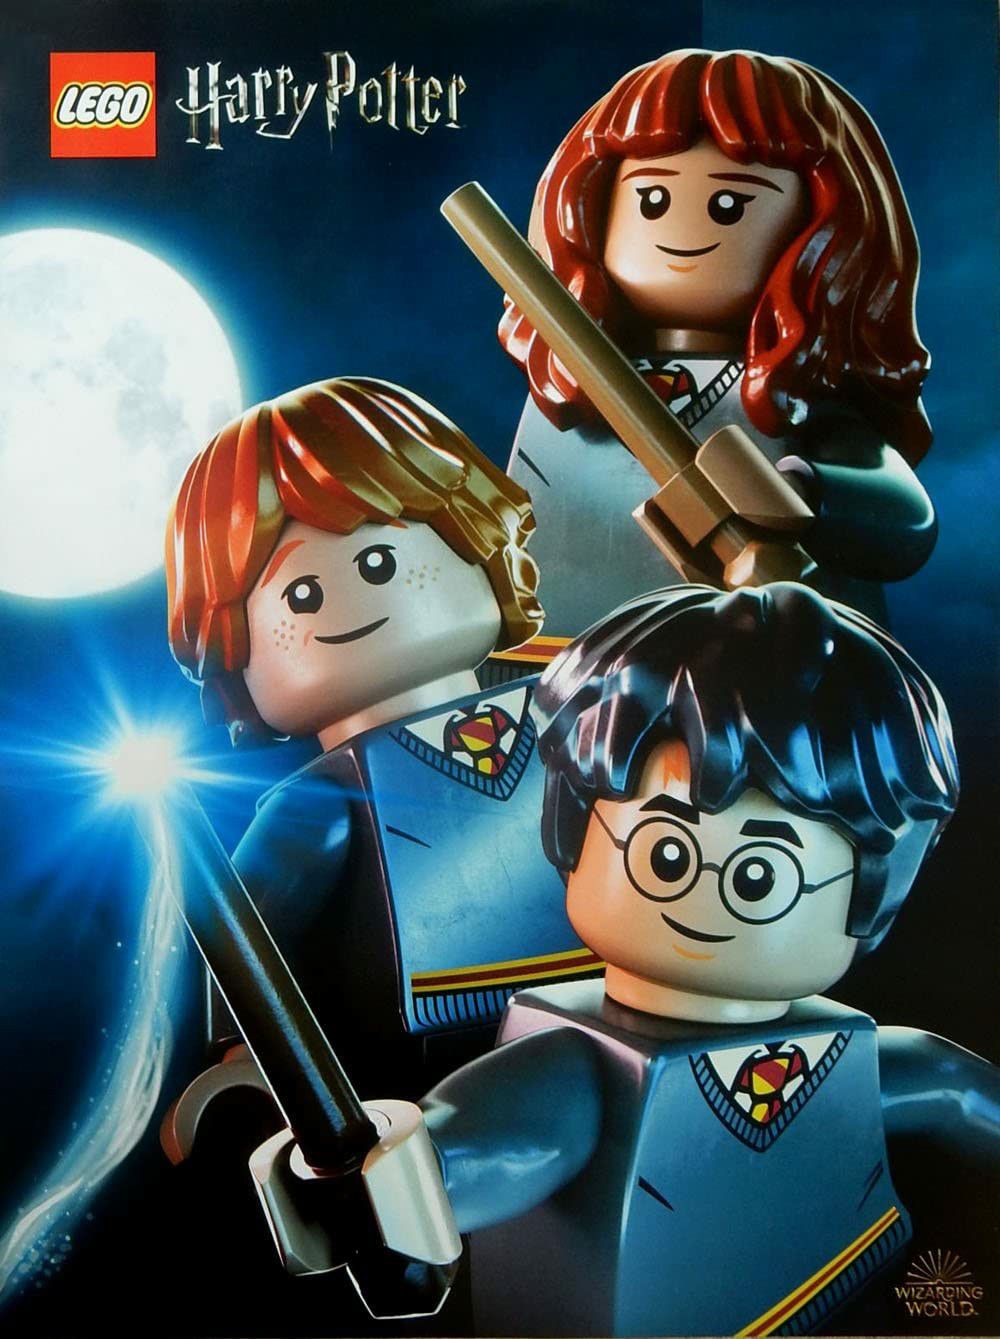 Lego Harry Potter 18" x 24" Poster